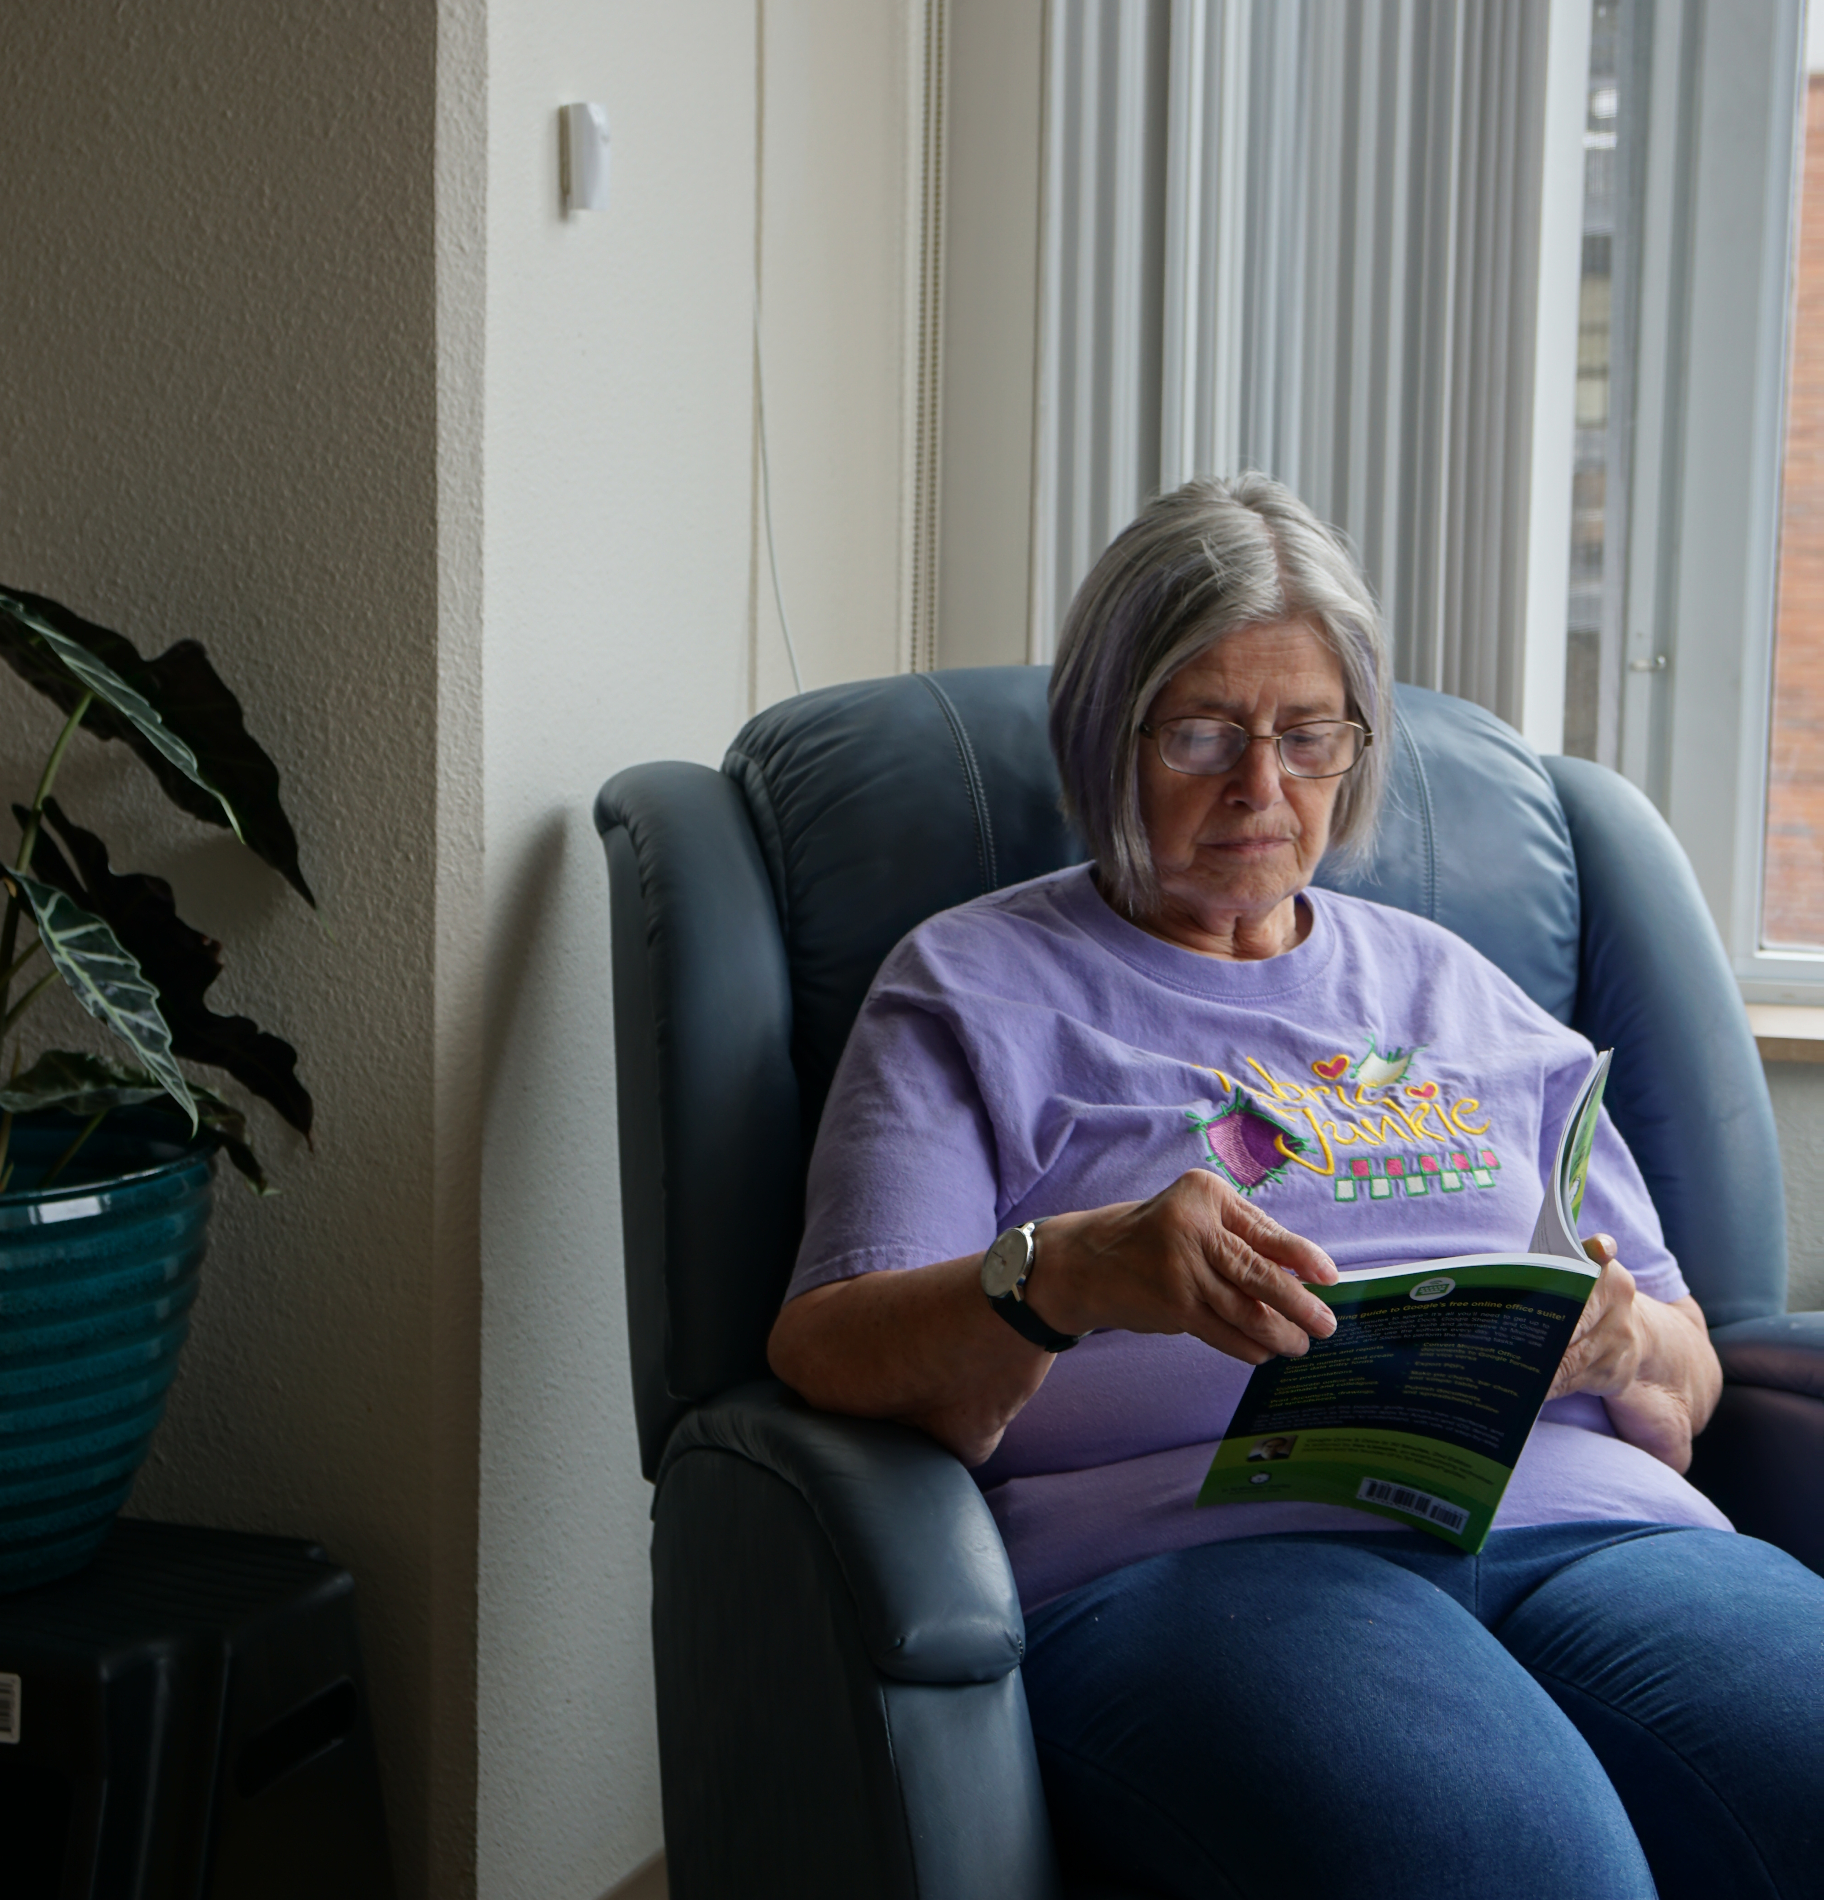 Research participant sits on an armchair reading a book in a living room